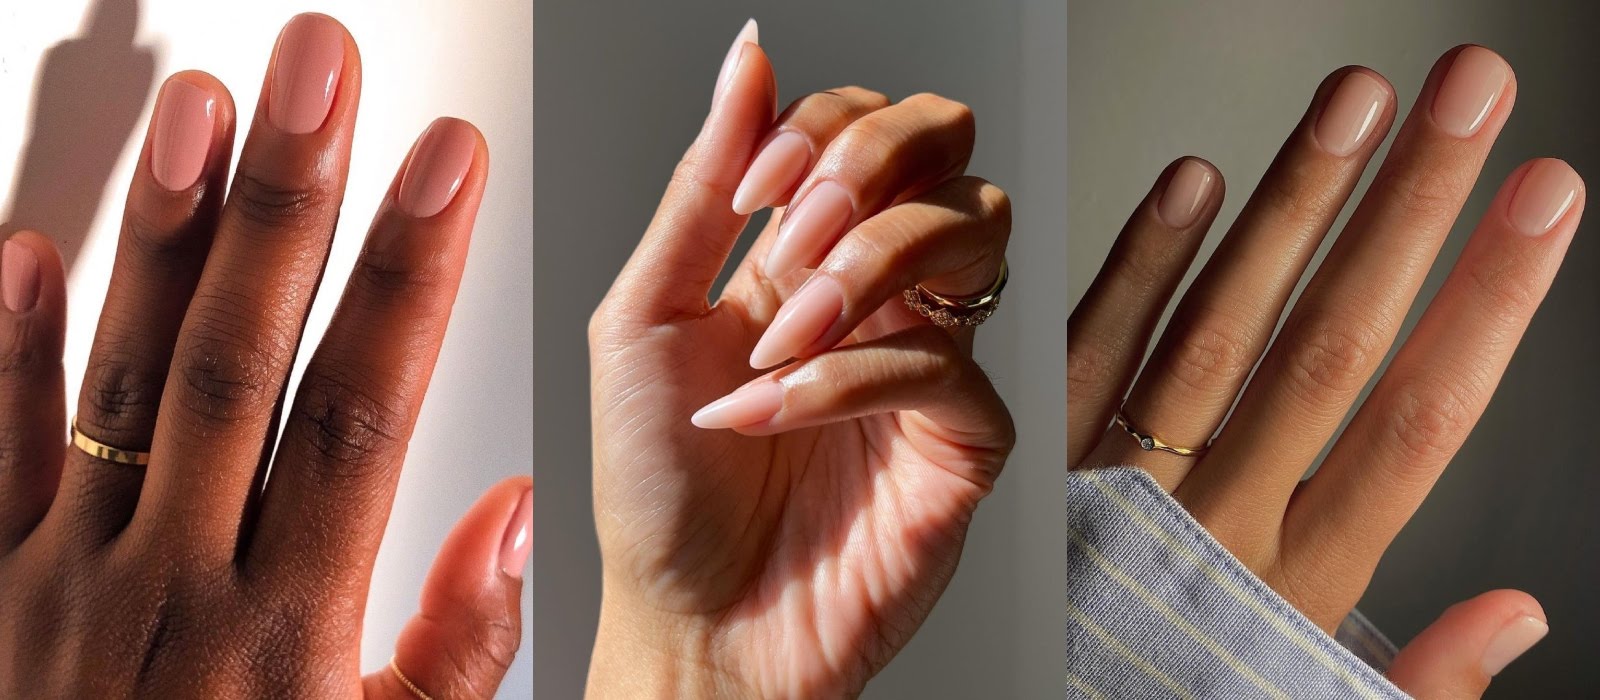 How to nail the milky clean girl nail aesthetic, according to a celebrity manicurist